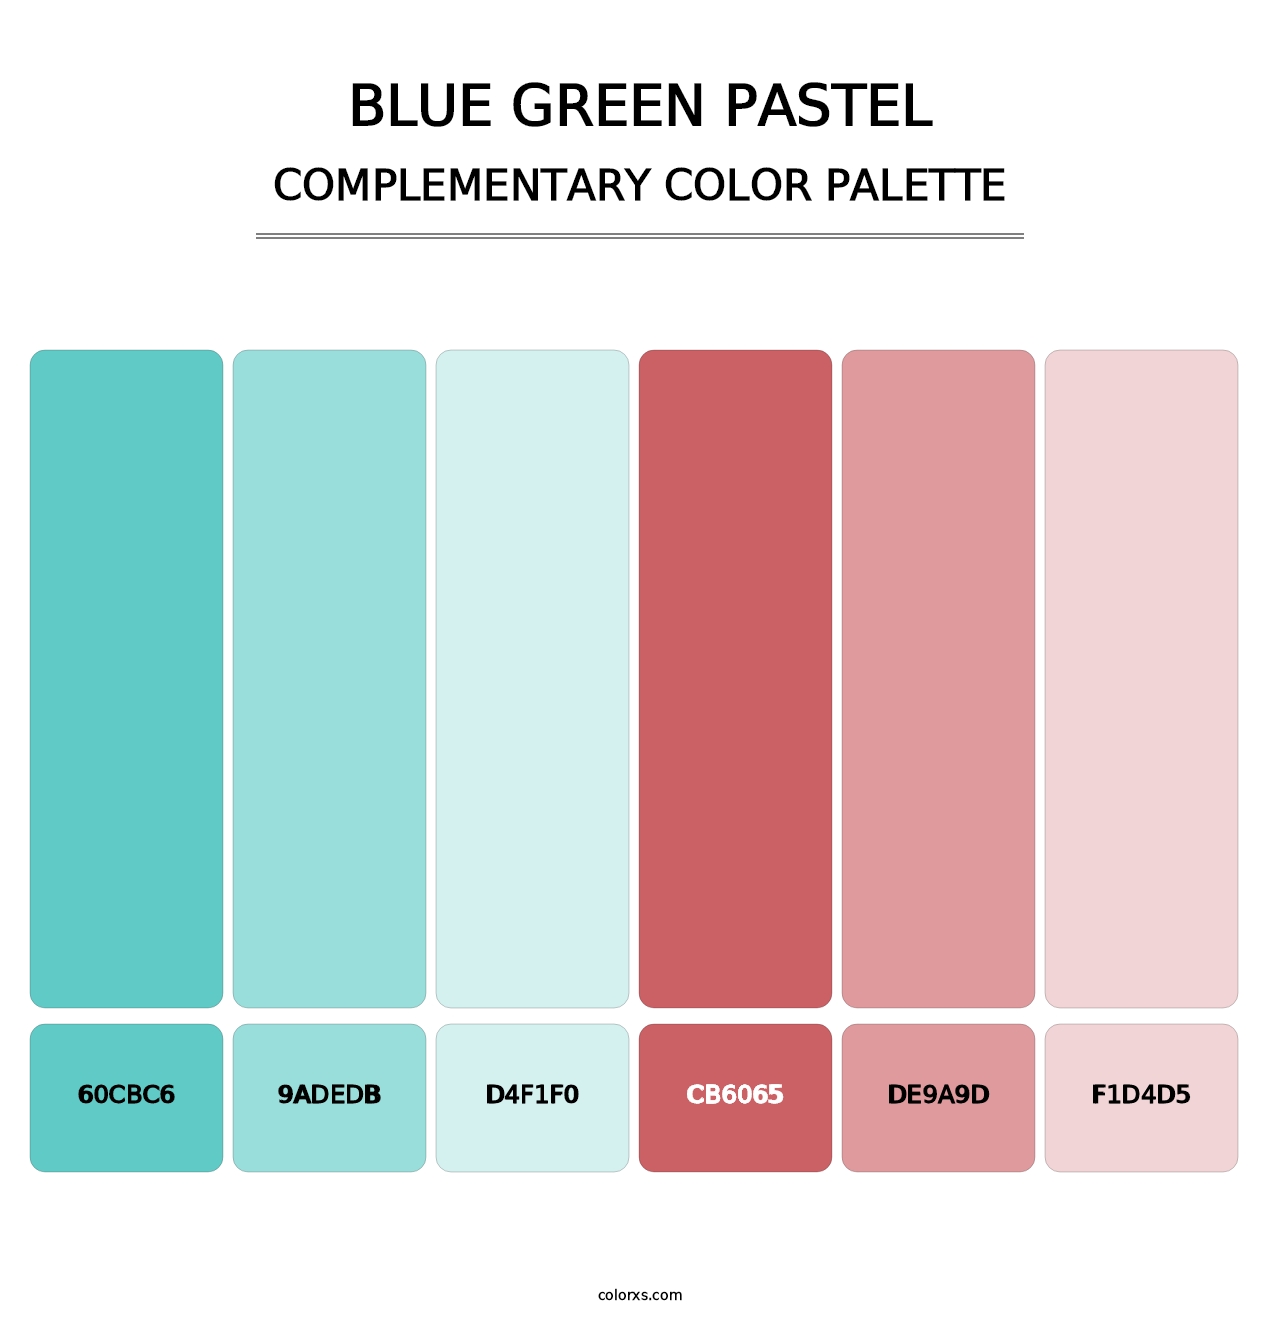 Blue Green Pastel - Complementary Color Palette